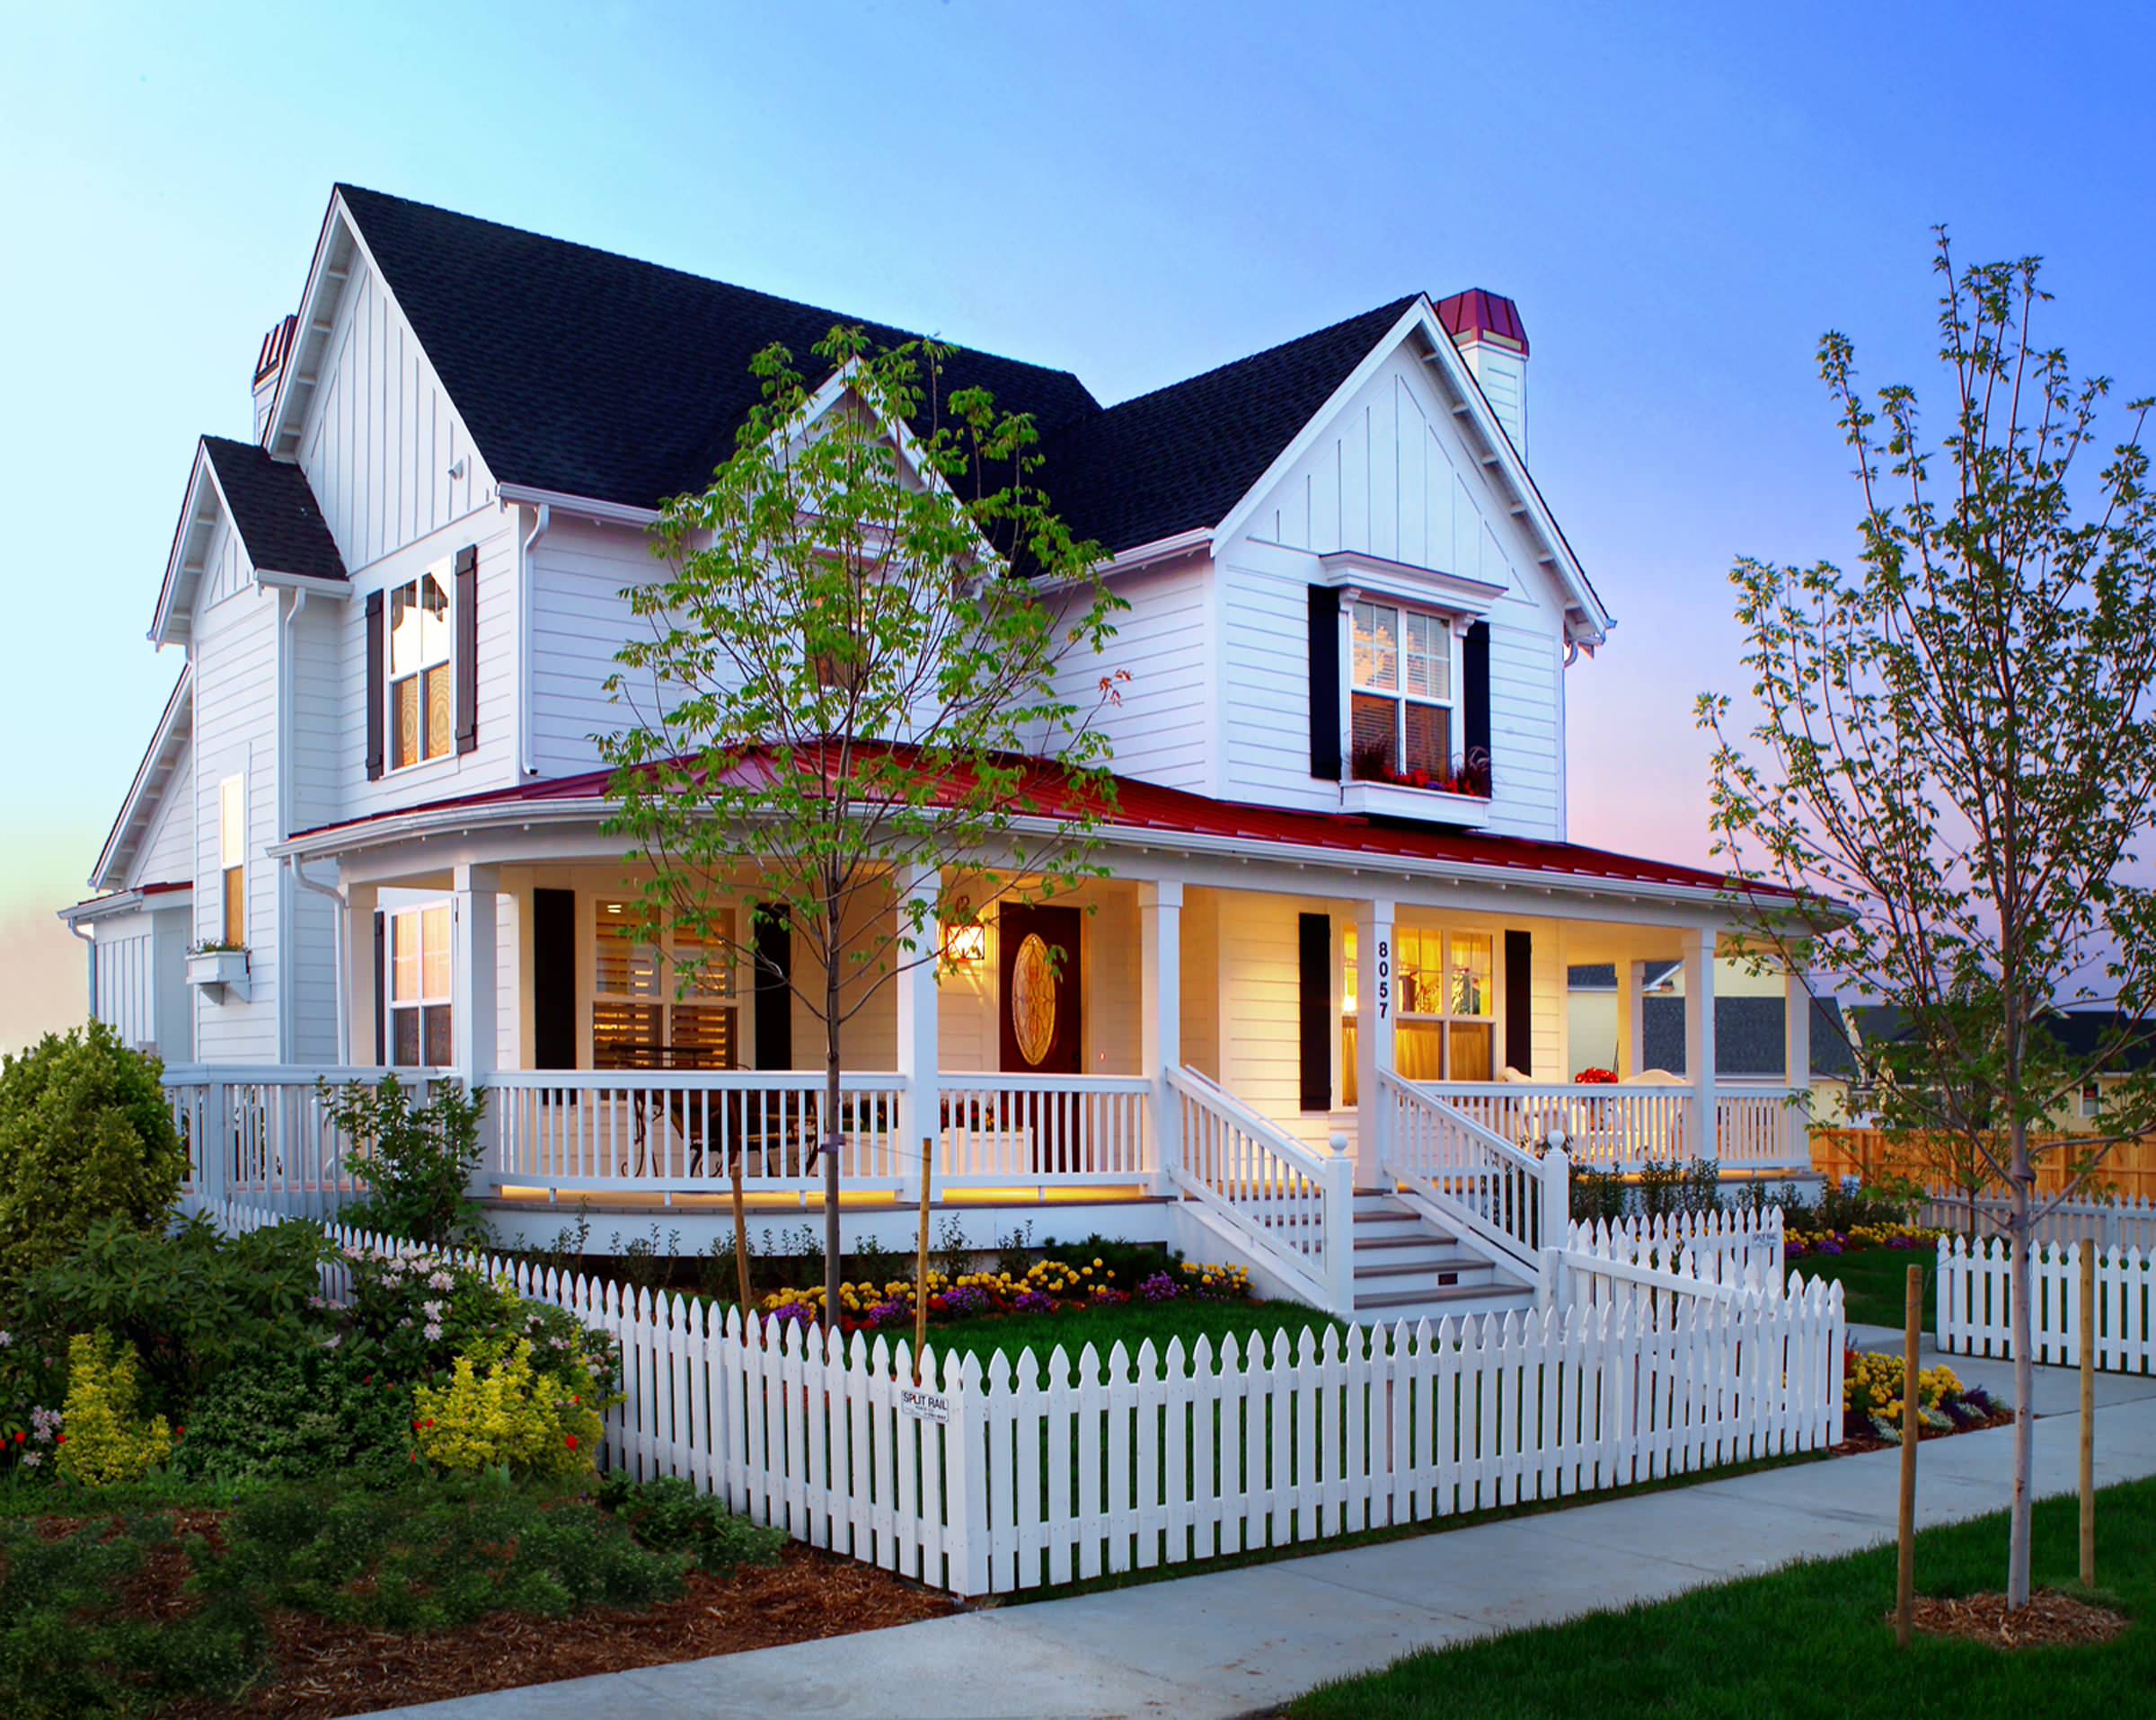 75 White Exterior Home with a Red Roof Ideas You'll Love - April, 2023 |  Houzz